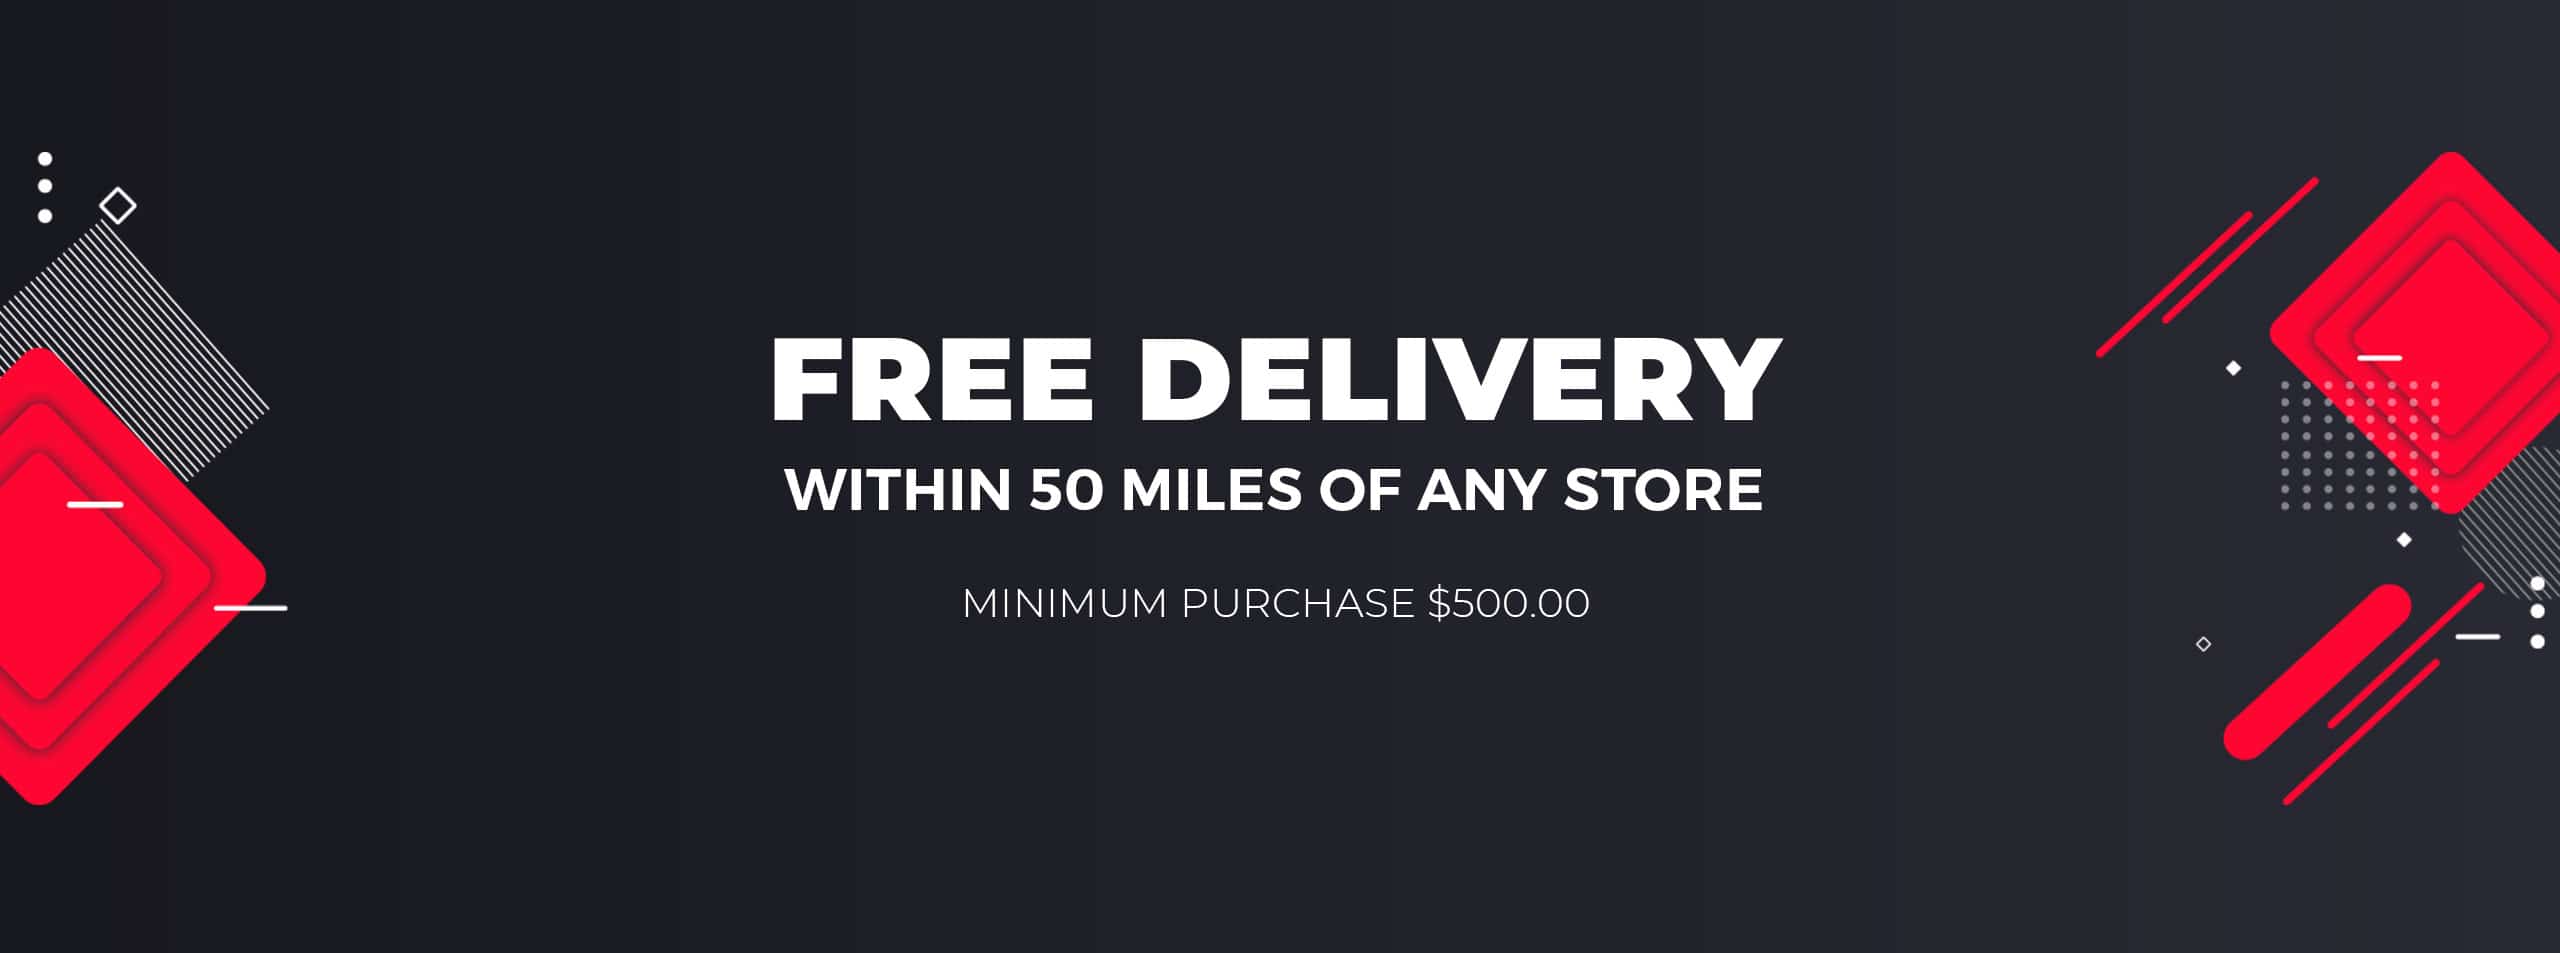 Free Delivery within 50 Miles of any Store - $500 Minimum Purchase Required